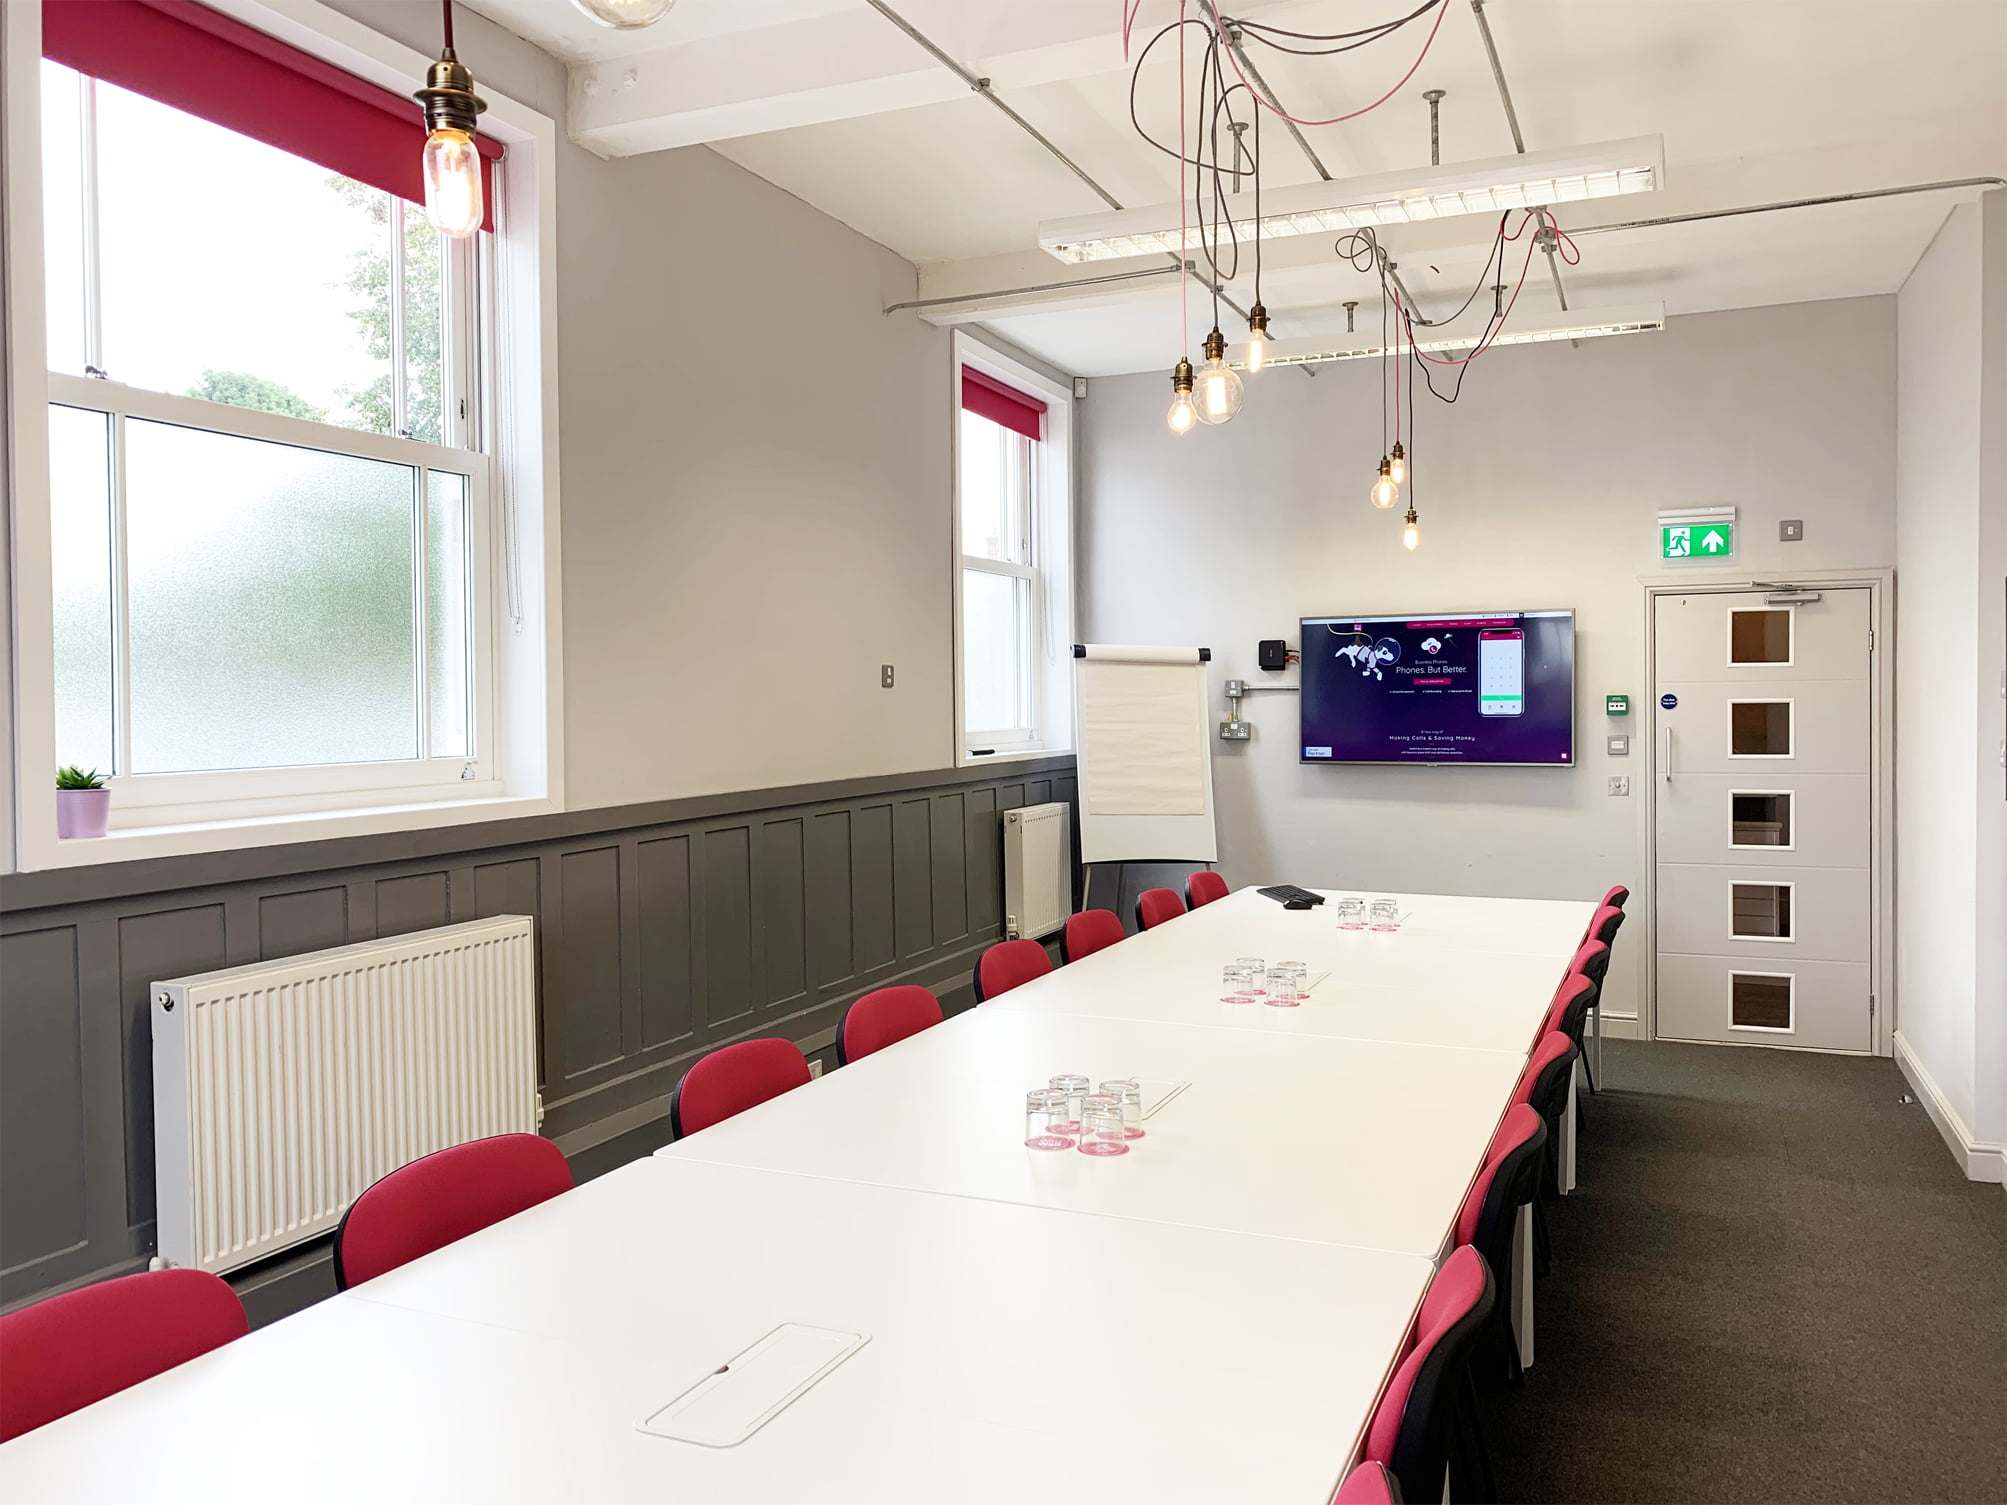 Meeting Rooms near to West Bridgford